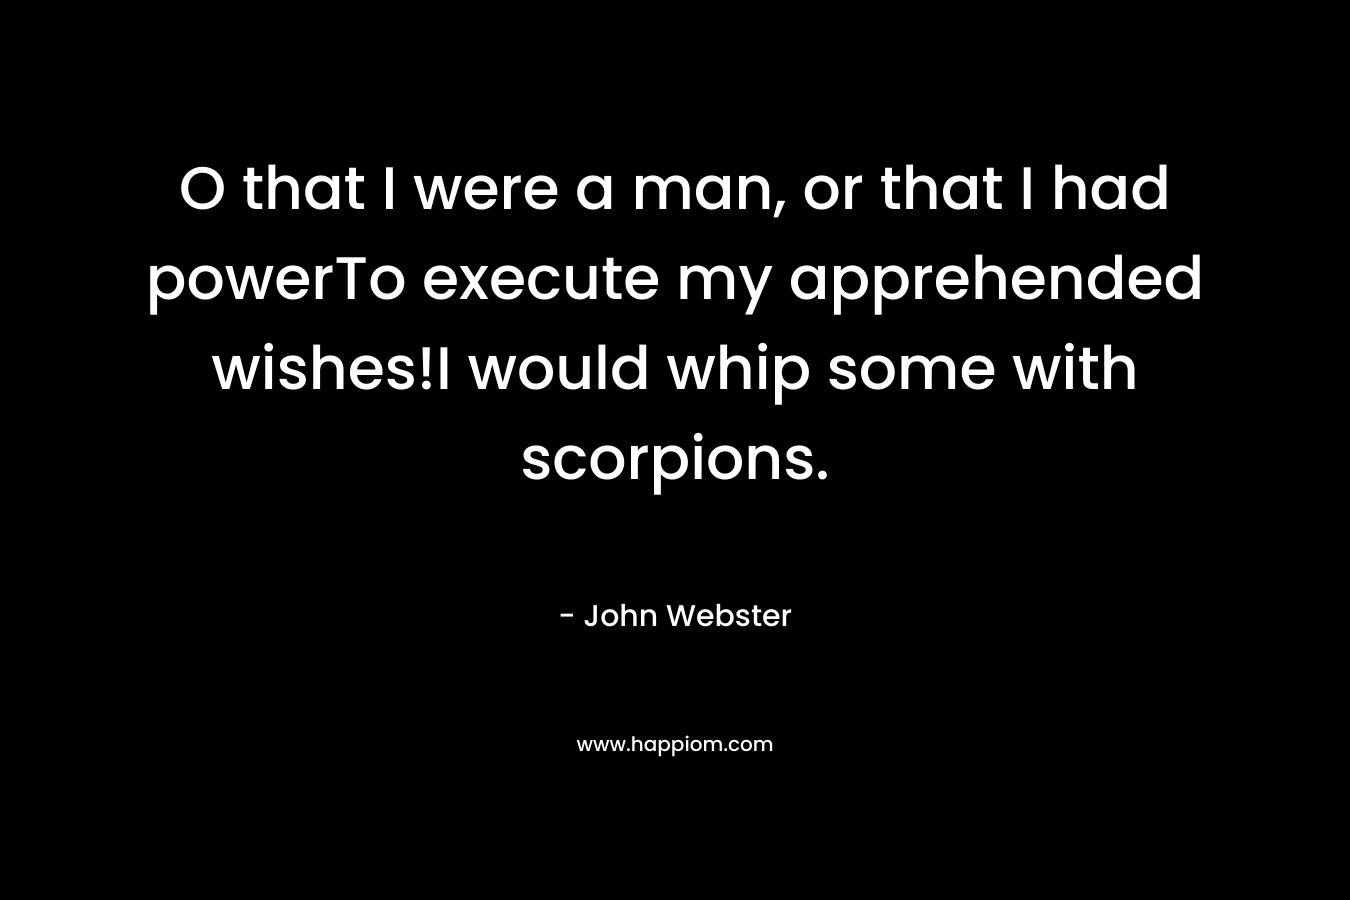 O that I were a man, or that I had powerTo execute my apprehended wishes!I would whip some with scorpions. – John Webster